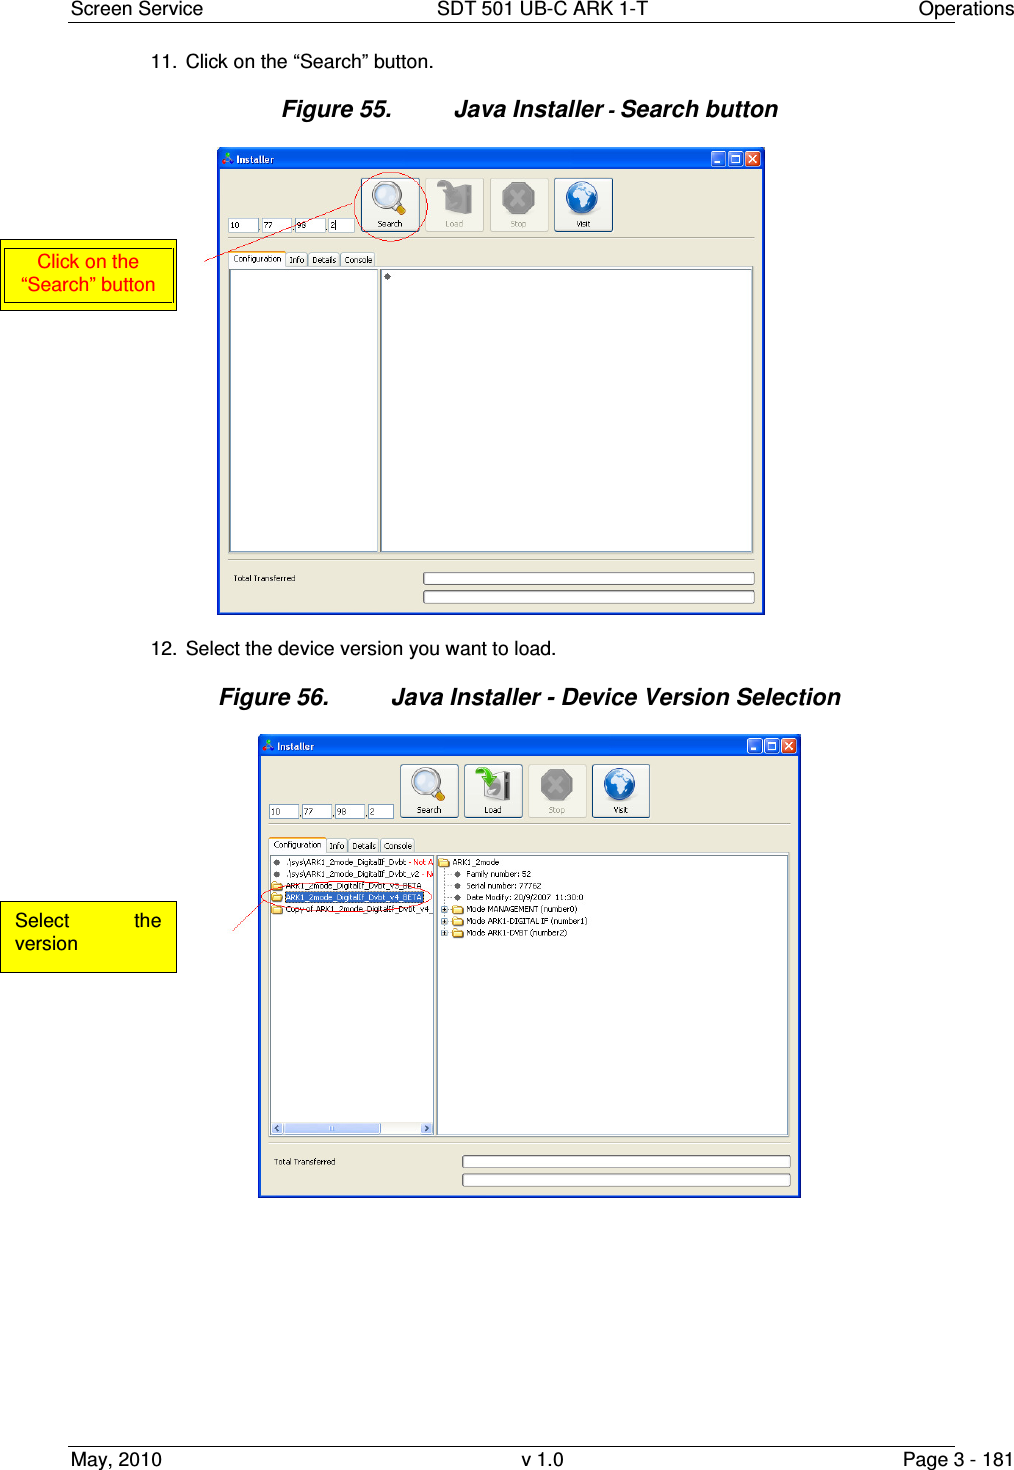 Screen Service  SDT 501 UB-C ARK 1-T  Operations May, 2010  v 1.0  Page 3 - 181 11.  Click on the “Search” button. Figure 55.  Java Installer - Search button  12.  Select the device version you want to load. Figure 56.  Java Installer - Device Version Selection    Click on the “Search” button Select  the version 